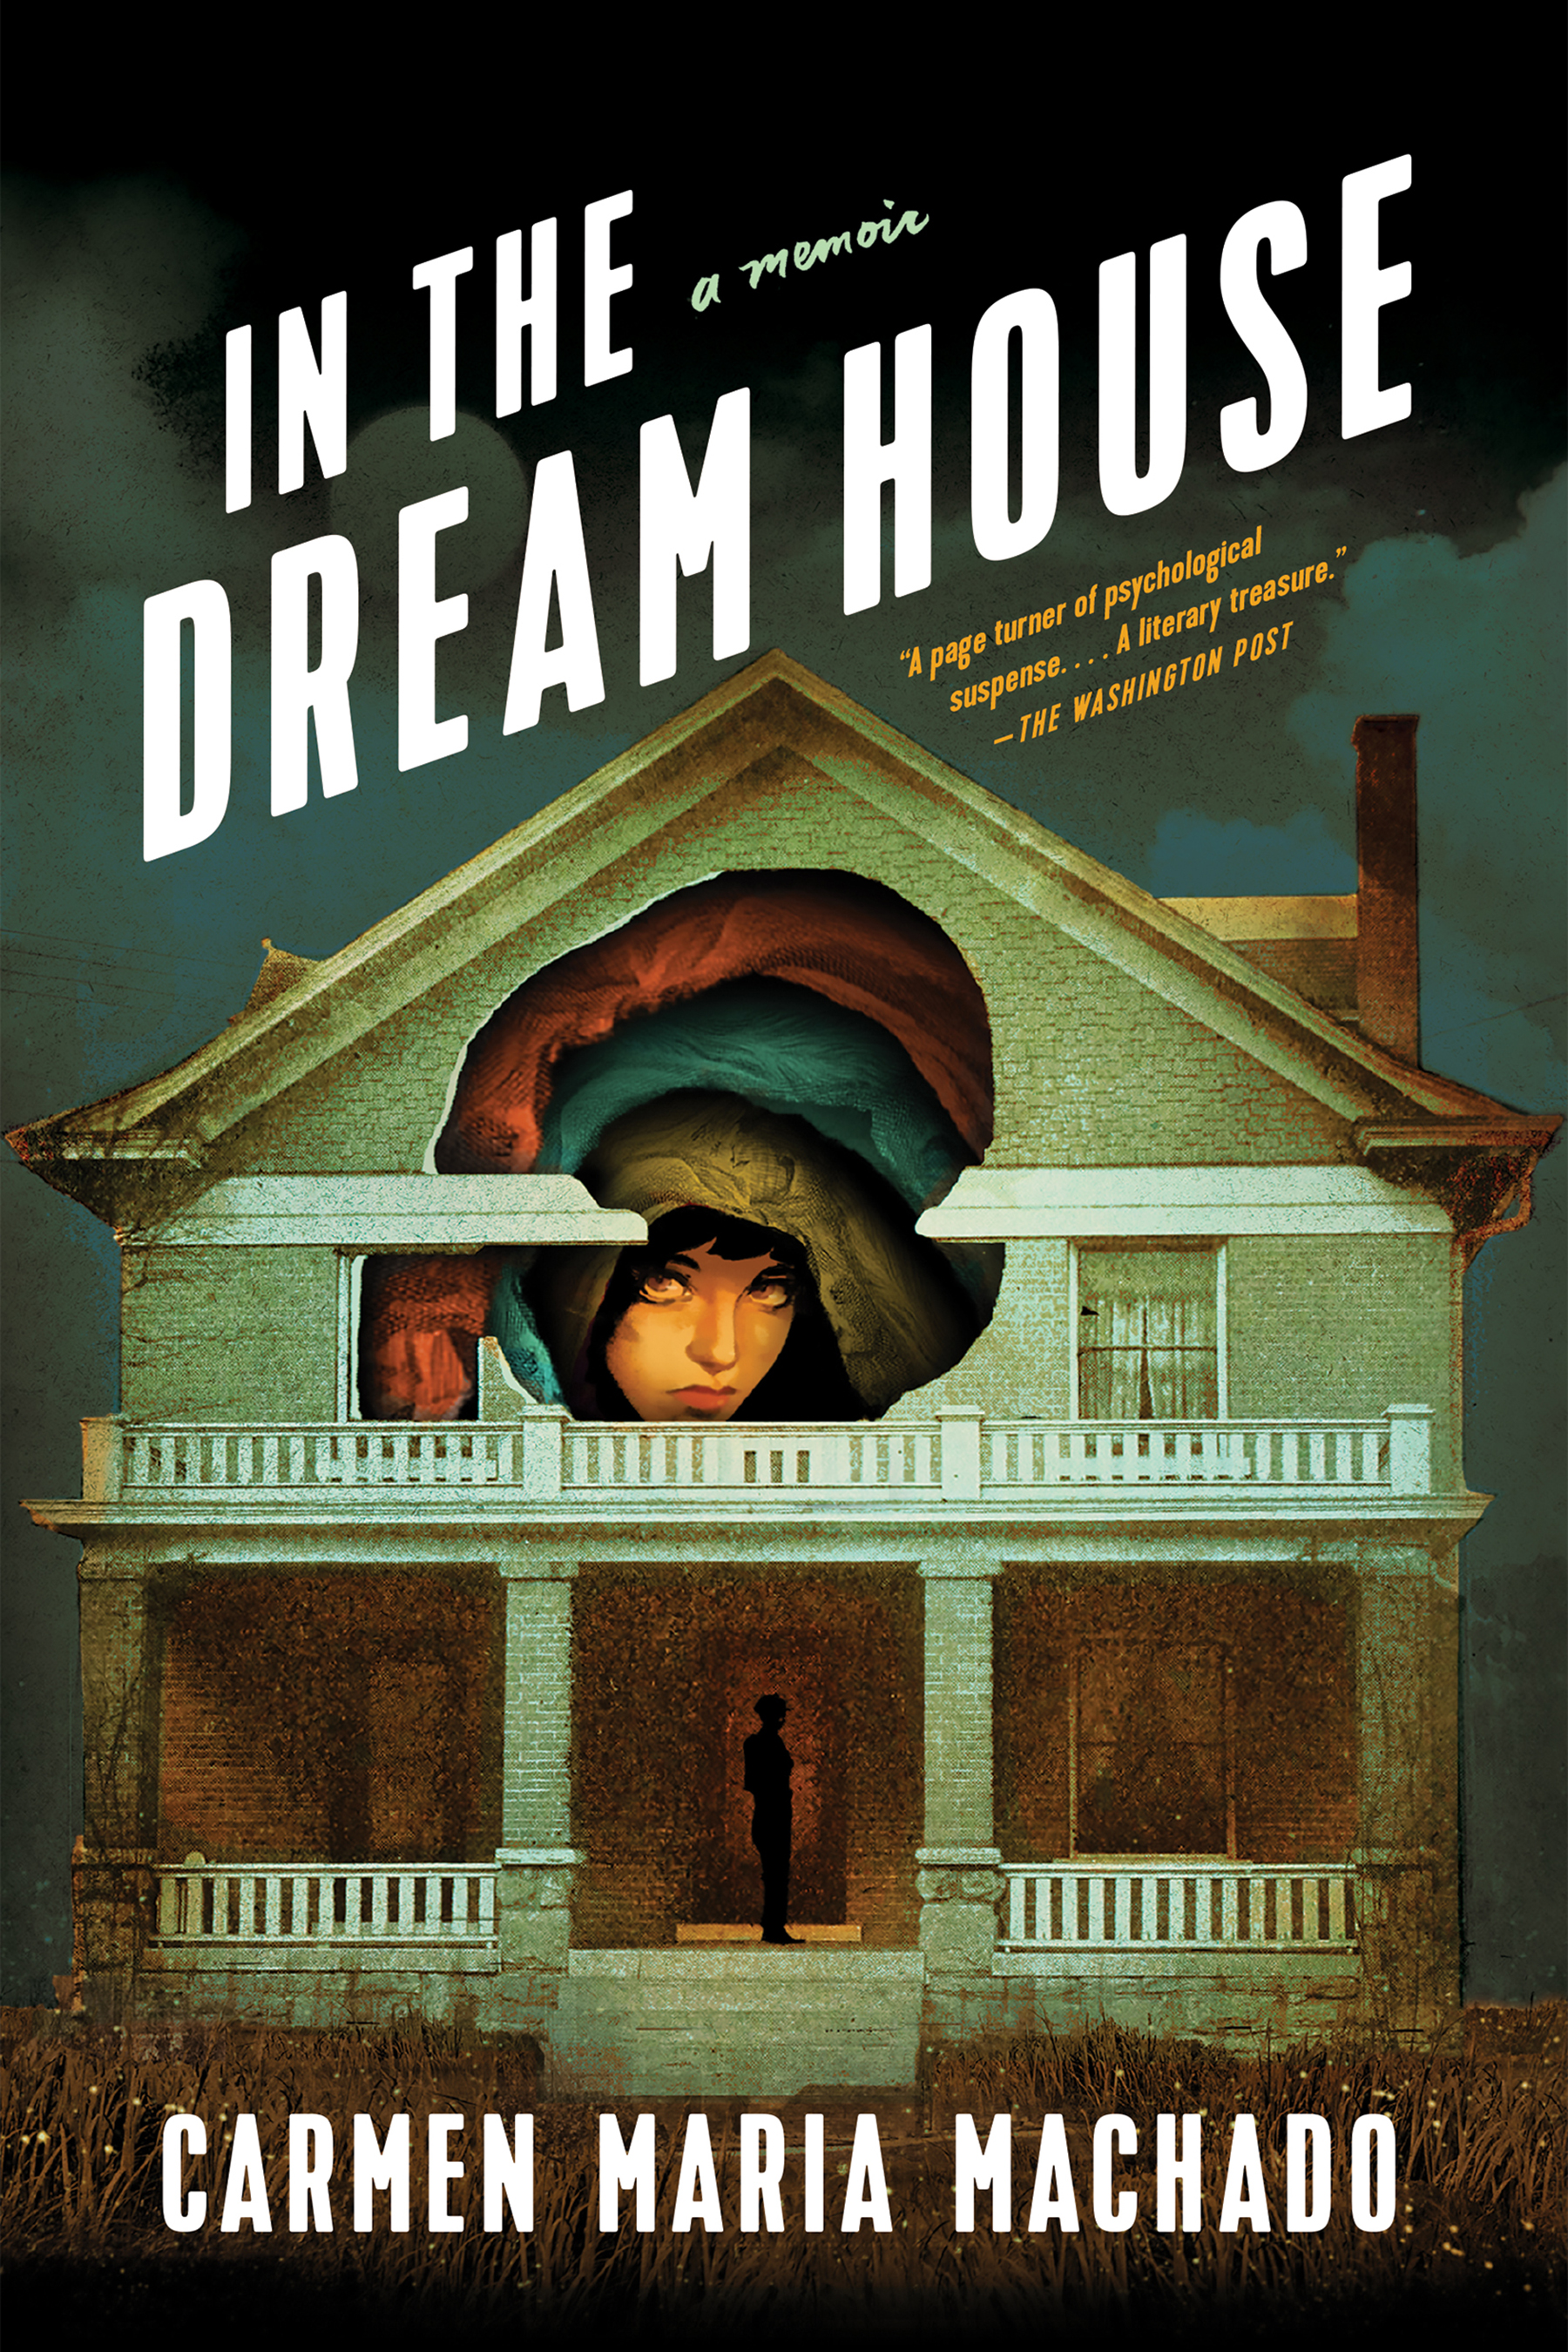 In the Dream House book cover